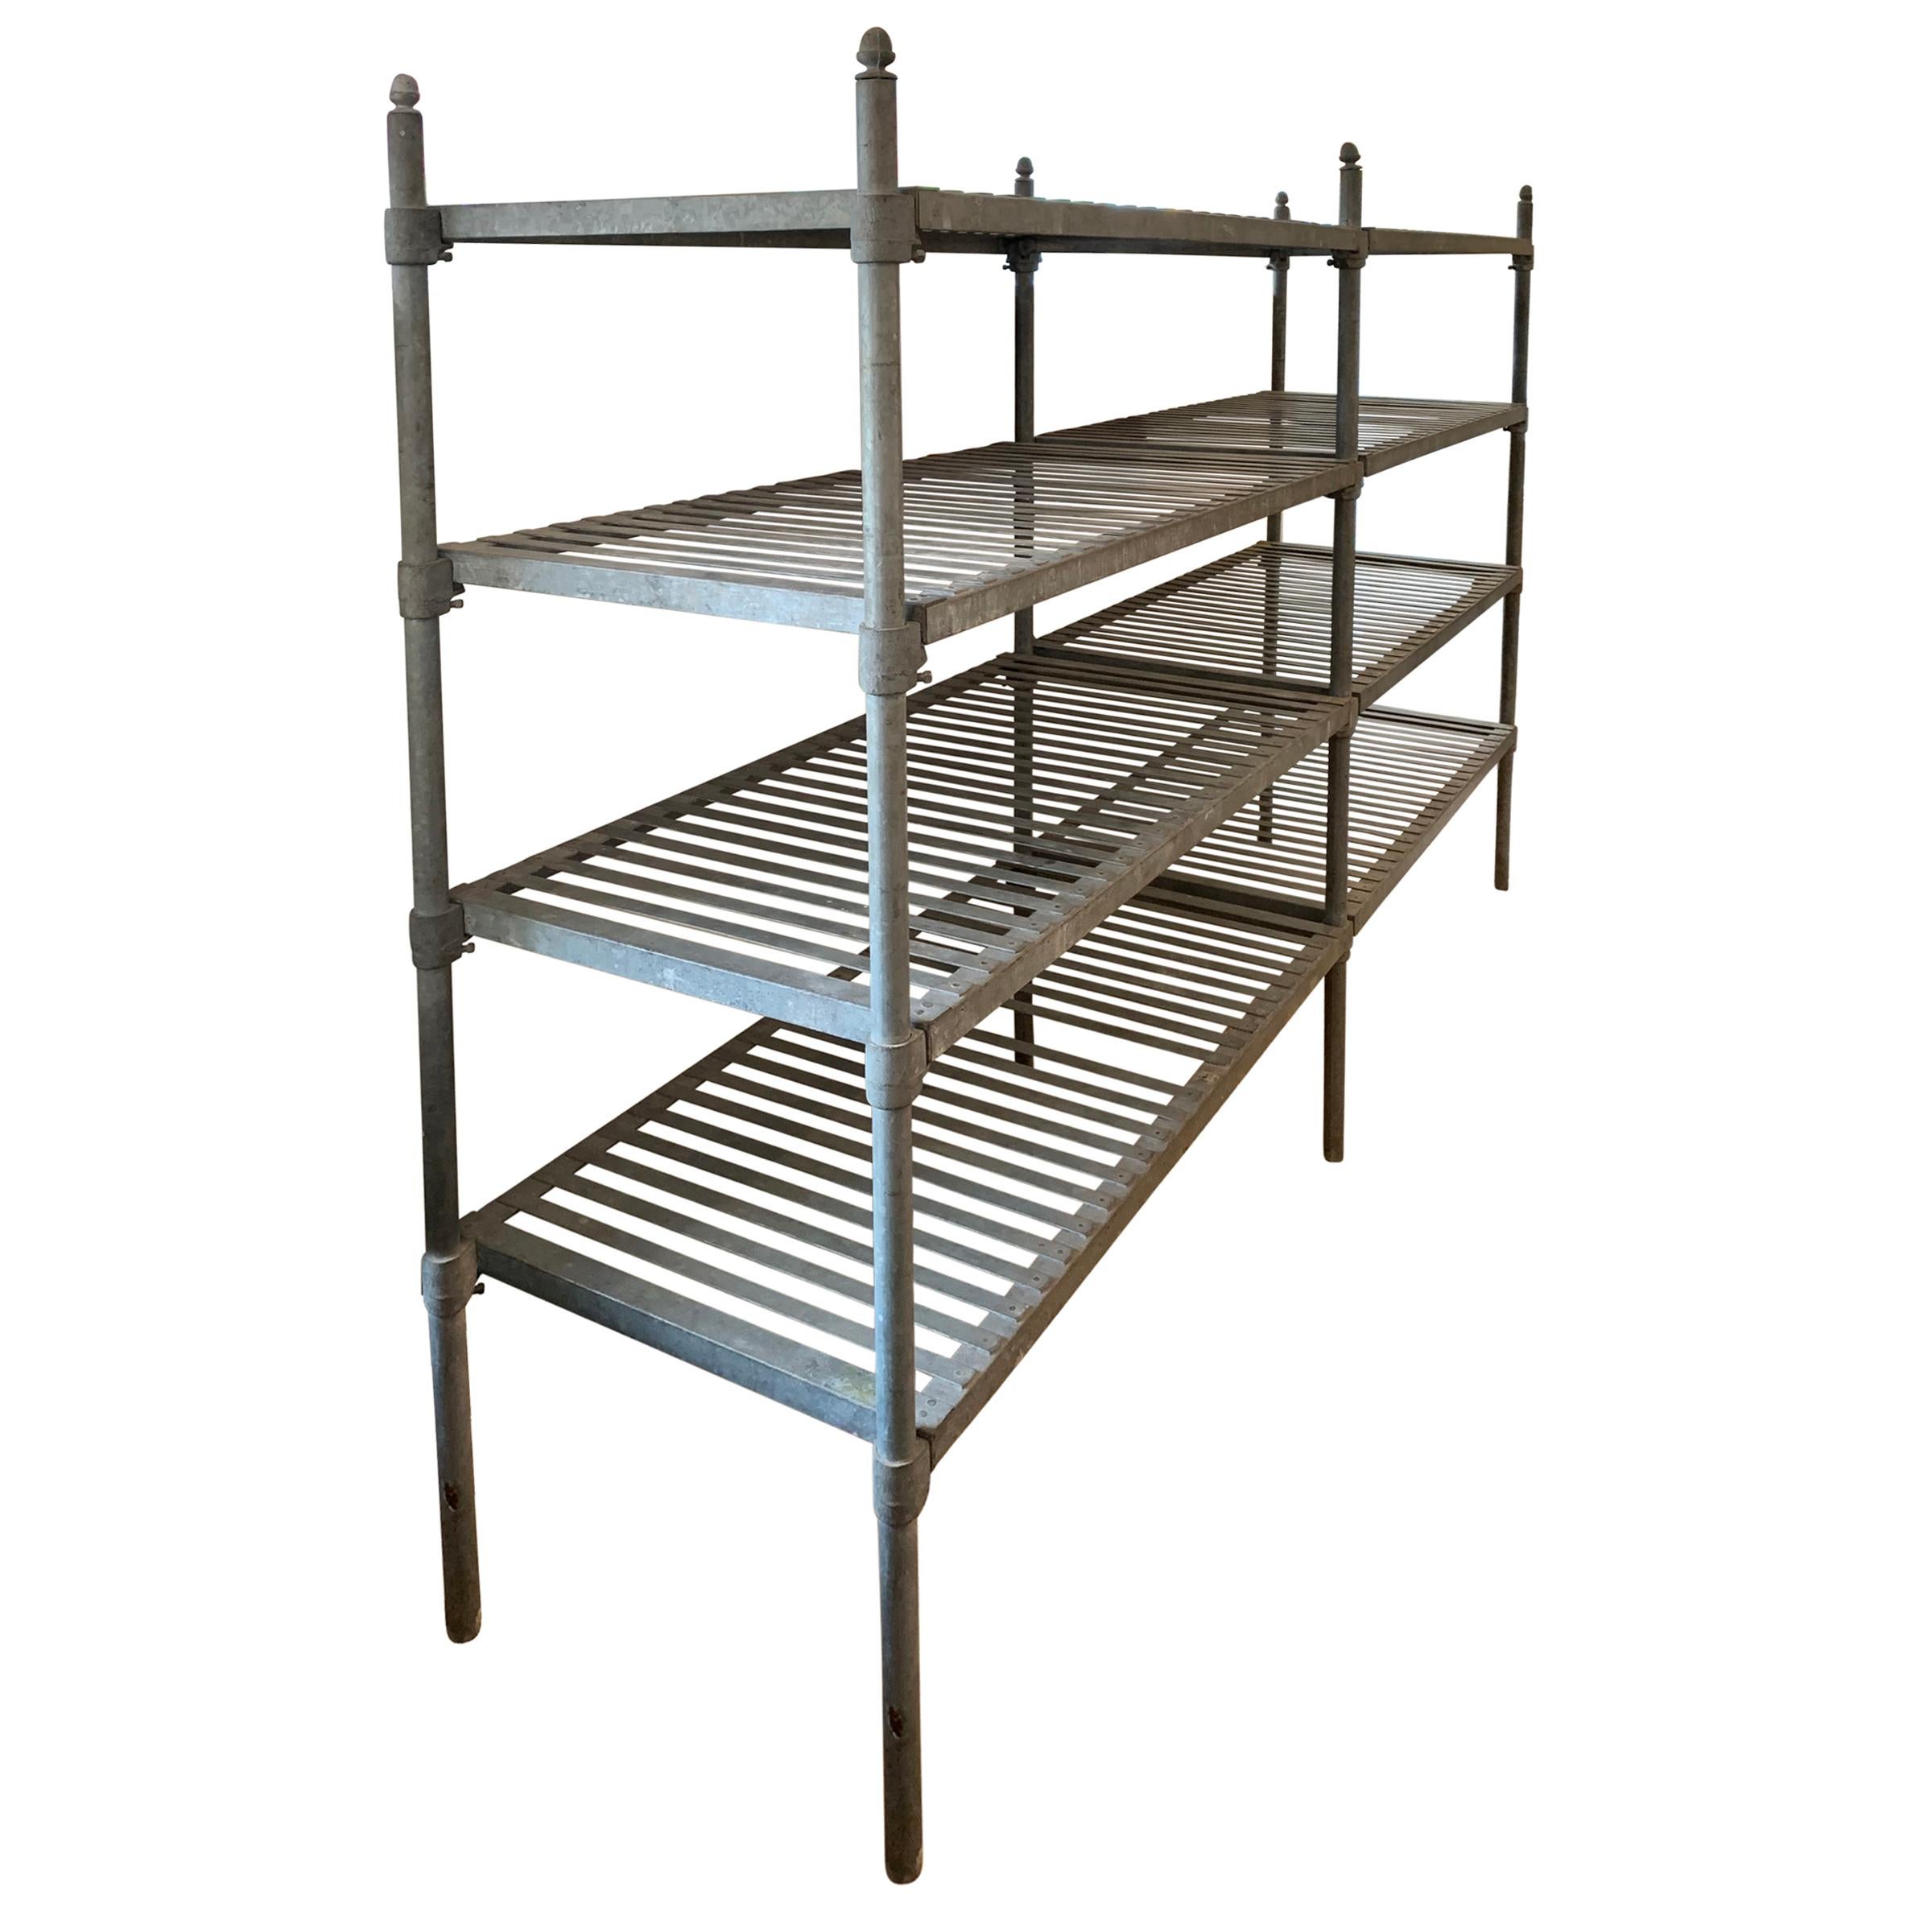 A fantastic early 20th century French industrial galvanized zinc shelving unit from a commercial kitchen or bakery with slatted shelves that can adjust in height, and whimsical acorn finials. The unit comes apart completely, and can even be